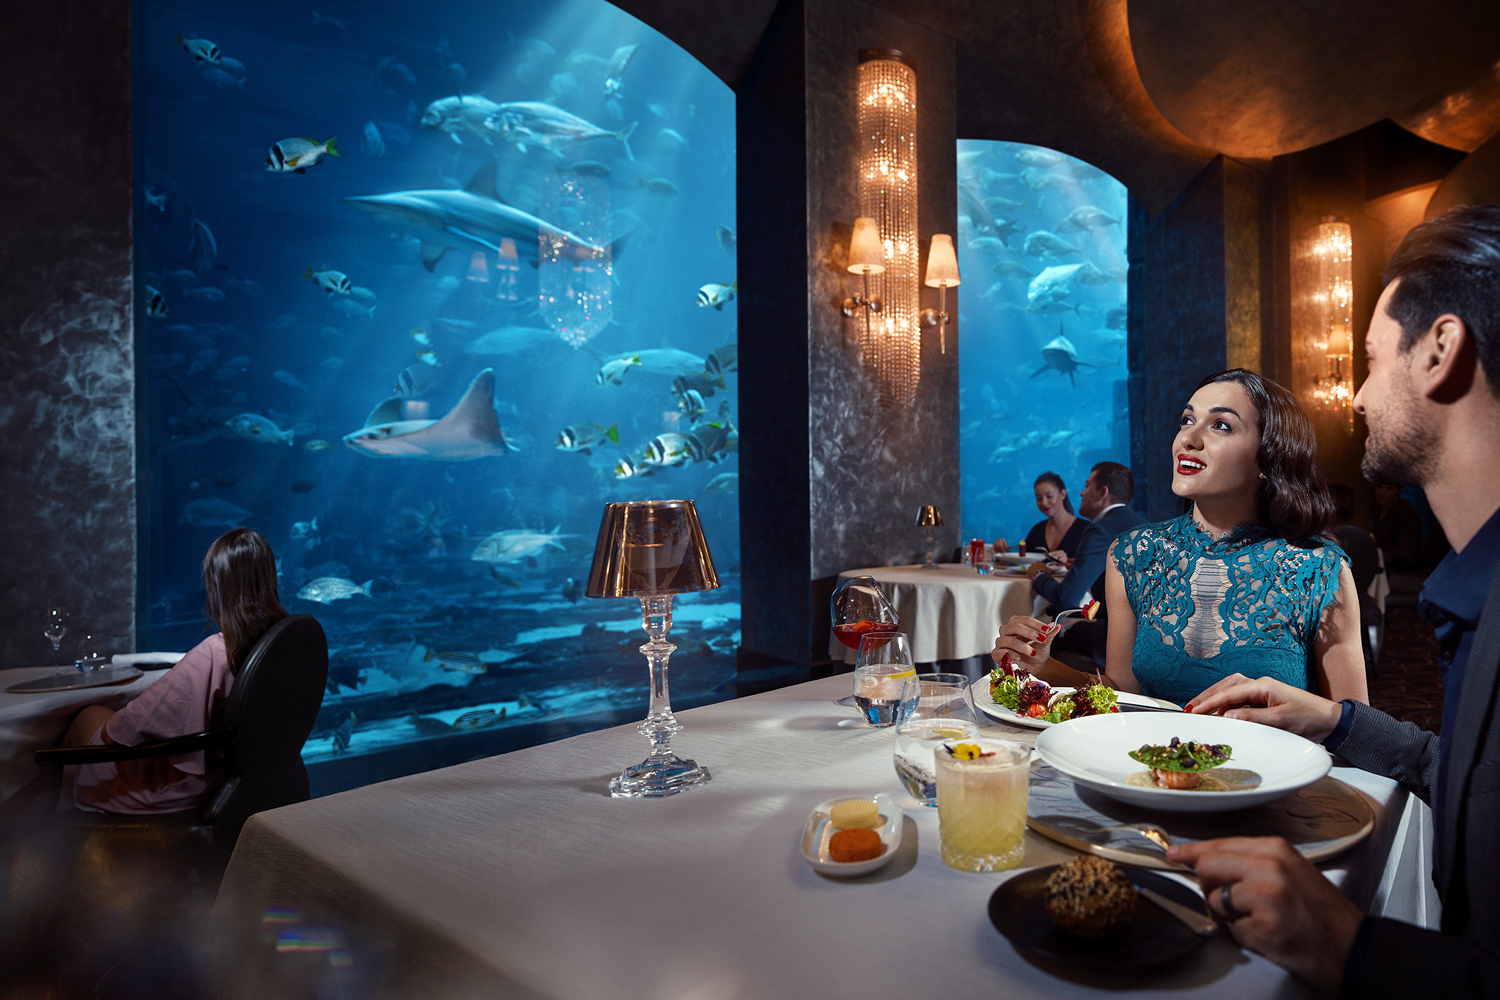 The unique fine dining restaurant Ossiano Dubai was inspired by the water.